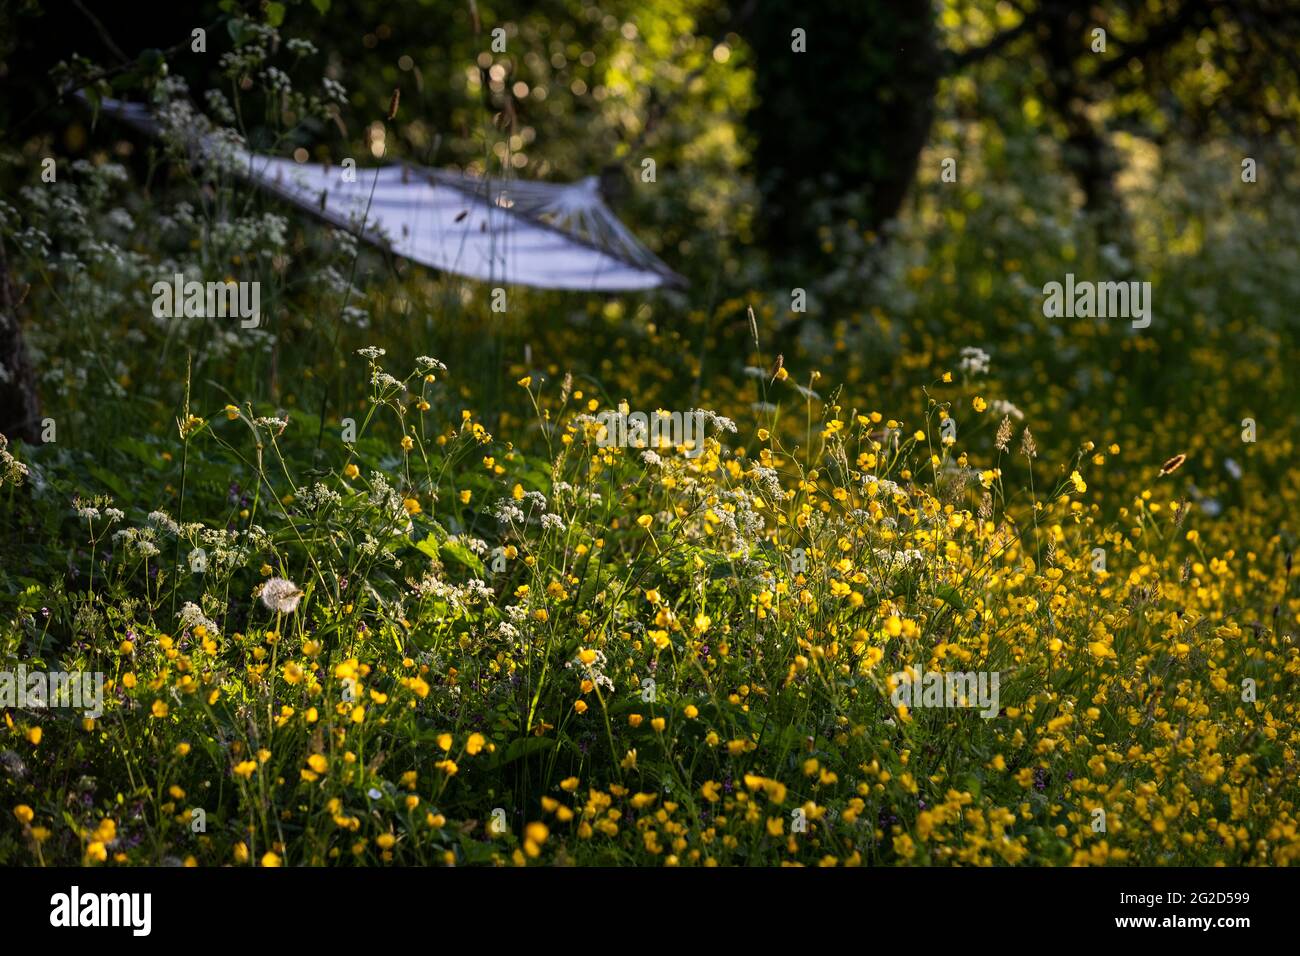 Meadow buttercups - Ranunculus acris and hammock. In flower in a back yard wildlife and pollinator friendly meadow area. Stock Photo